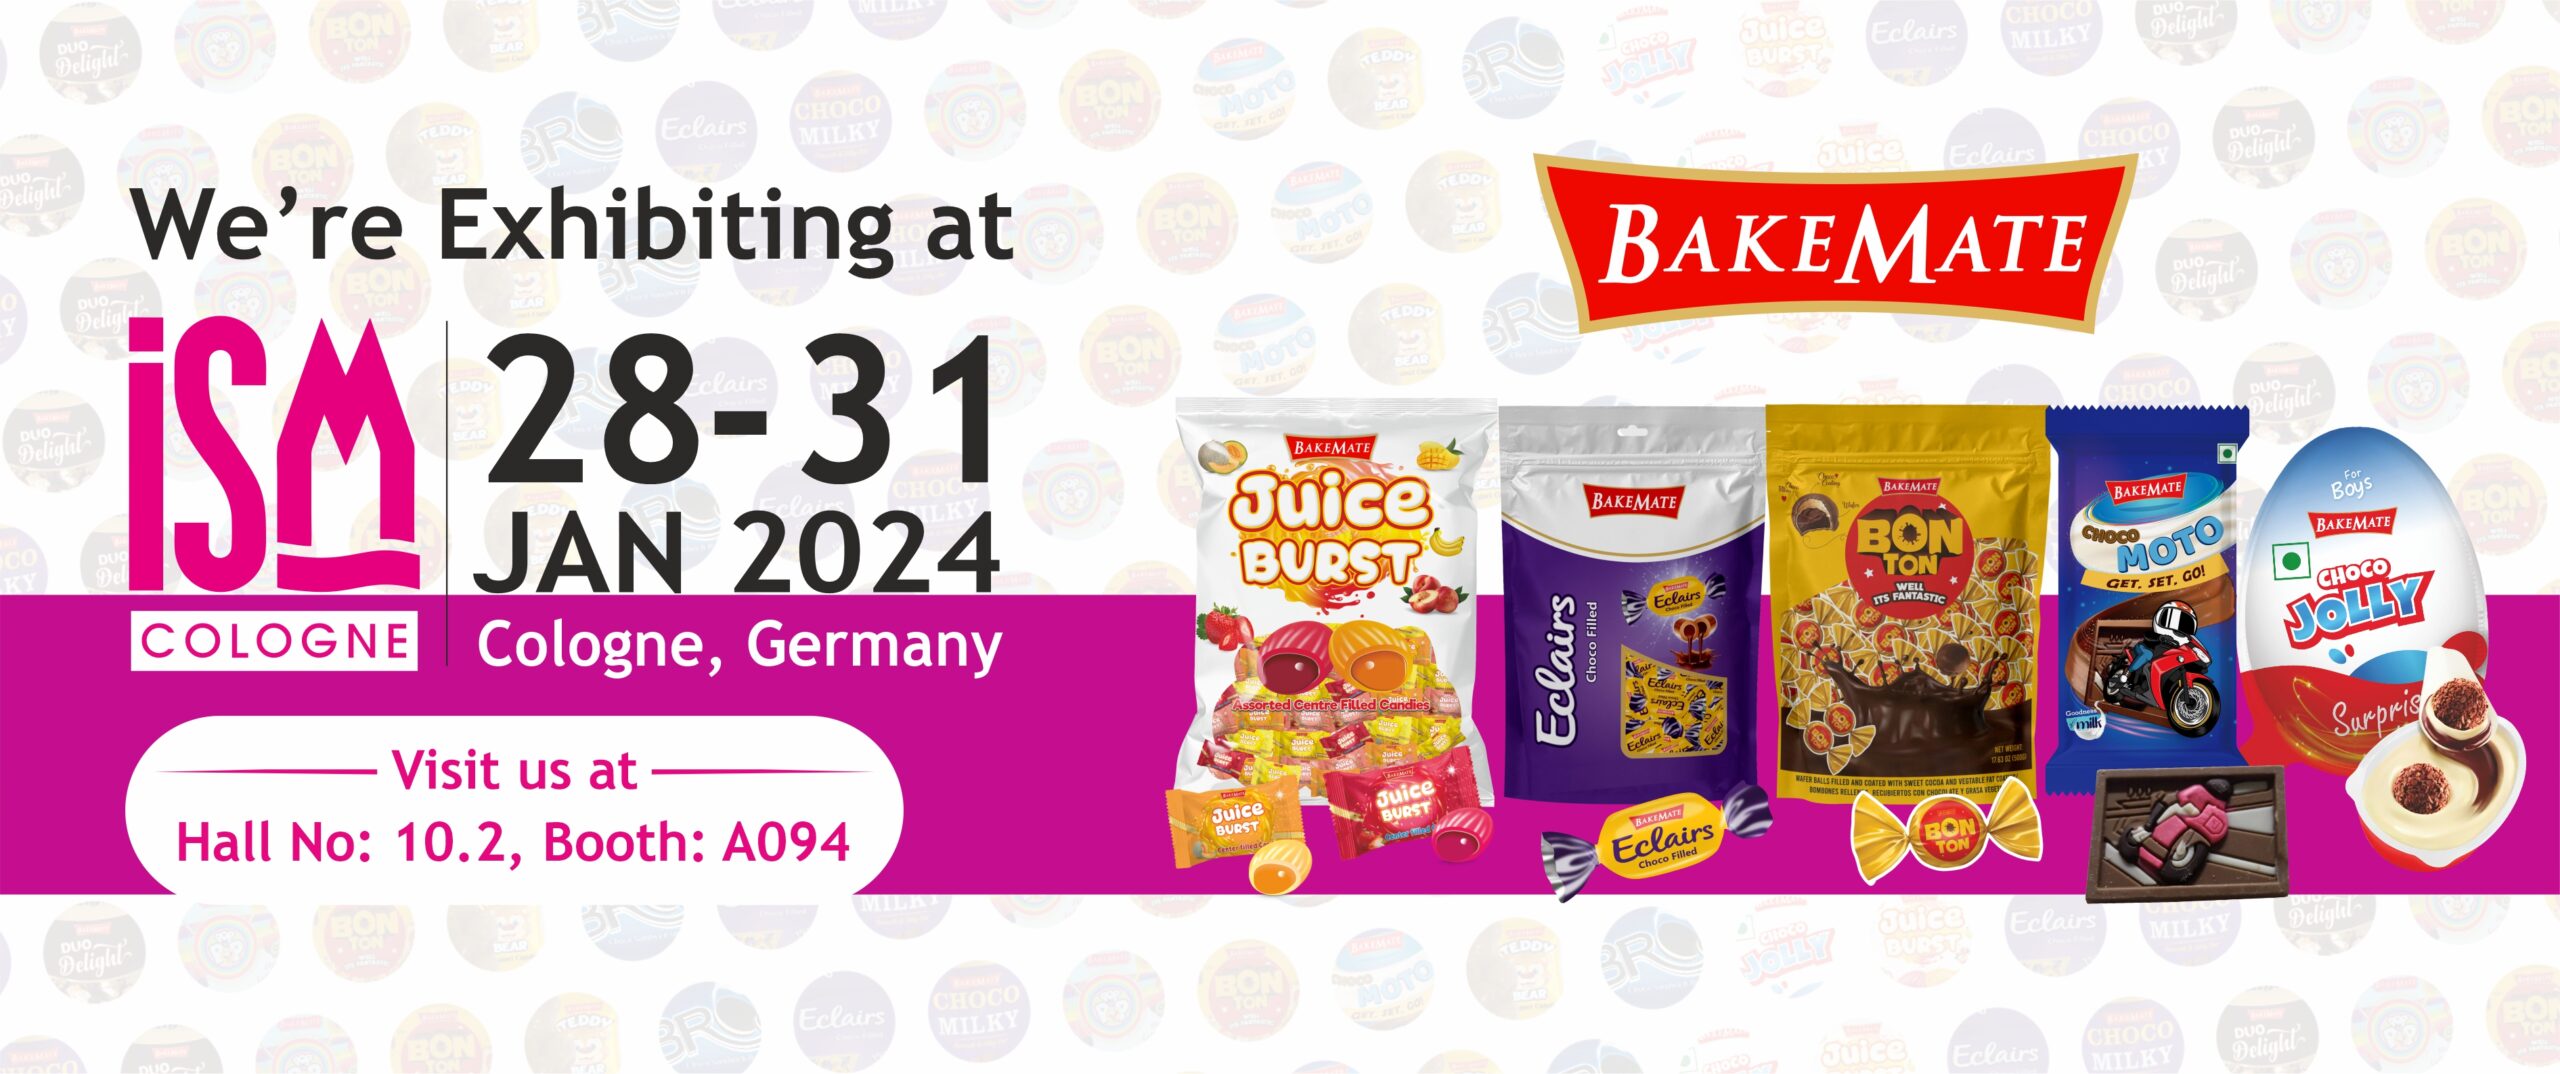 ISM | ISM Cologne | Germany expo | Live expo | Food expo | Exhibition 2024 | ISM2024 | Exhibition | Food and Beverage | BakeMate | live show | live event |